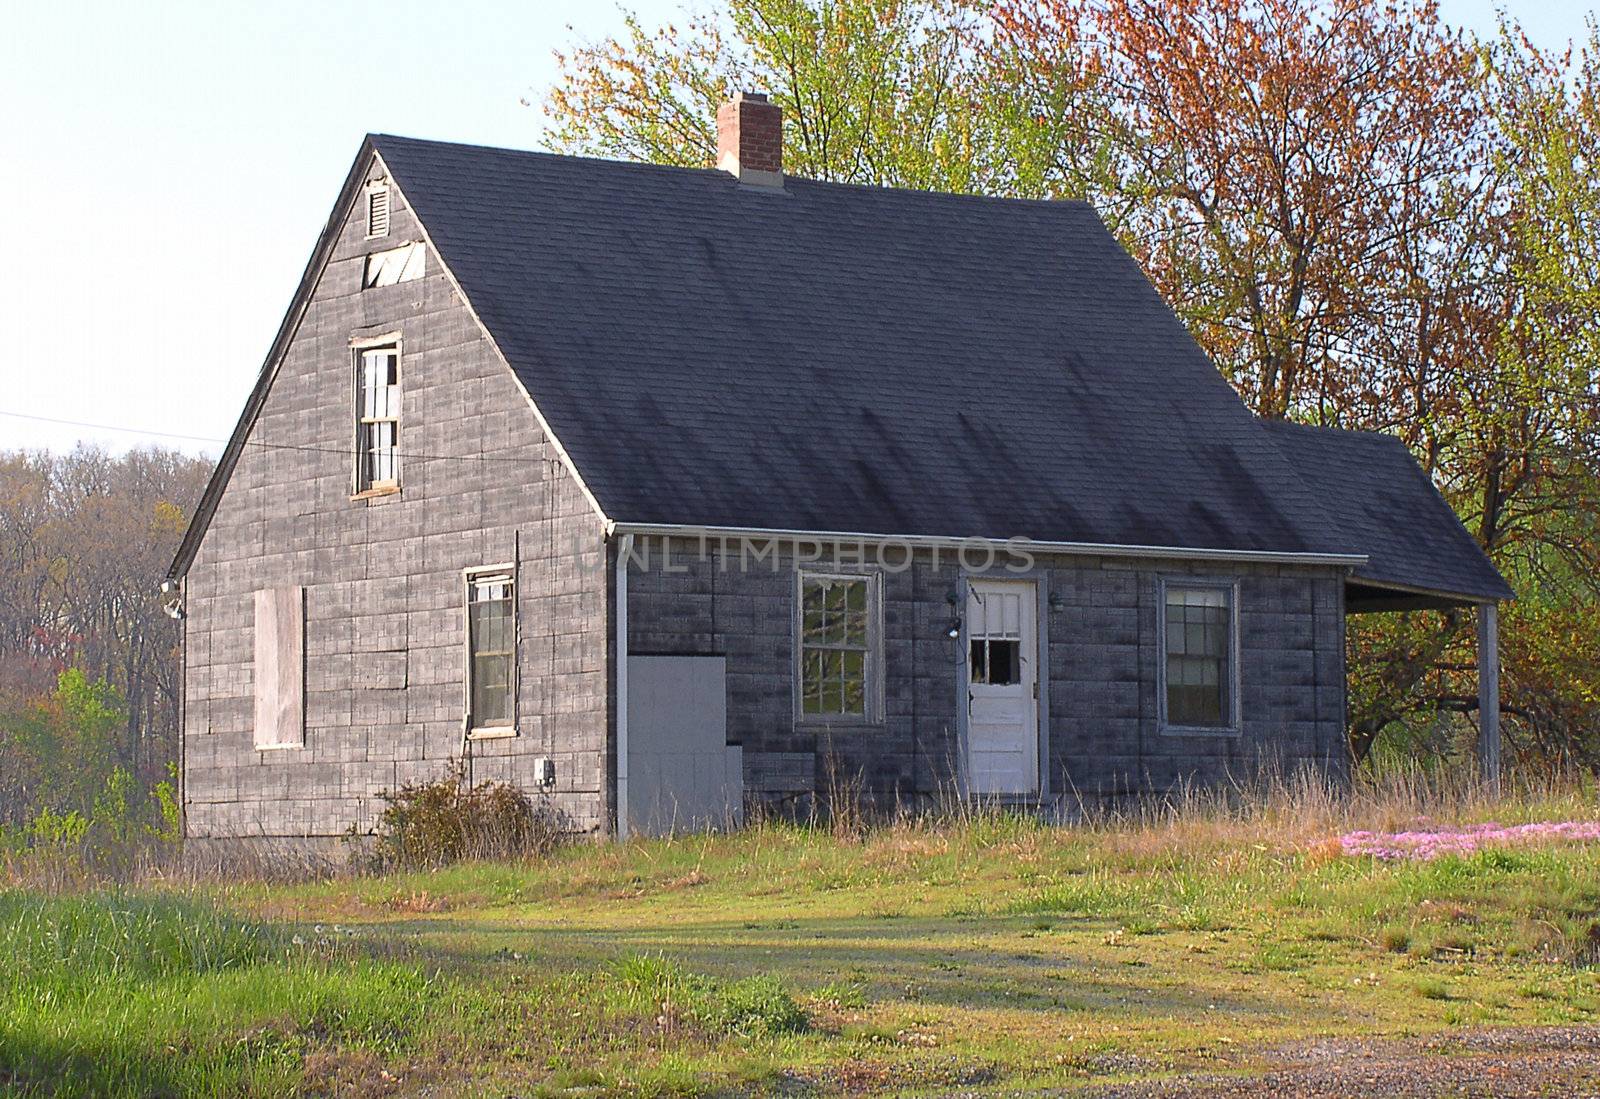 A house in a rural area, found in a state of disrepair. The side porch slumps slightly, some windows are broken and siding missing, but outward appearance is that this could be reinhabited with some repair work.